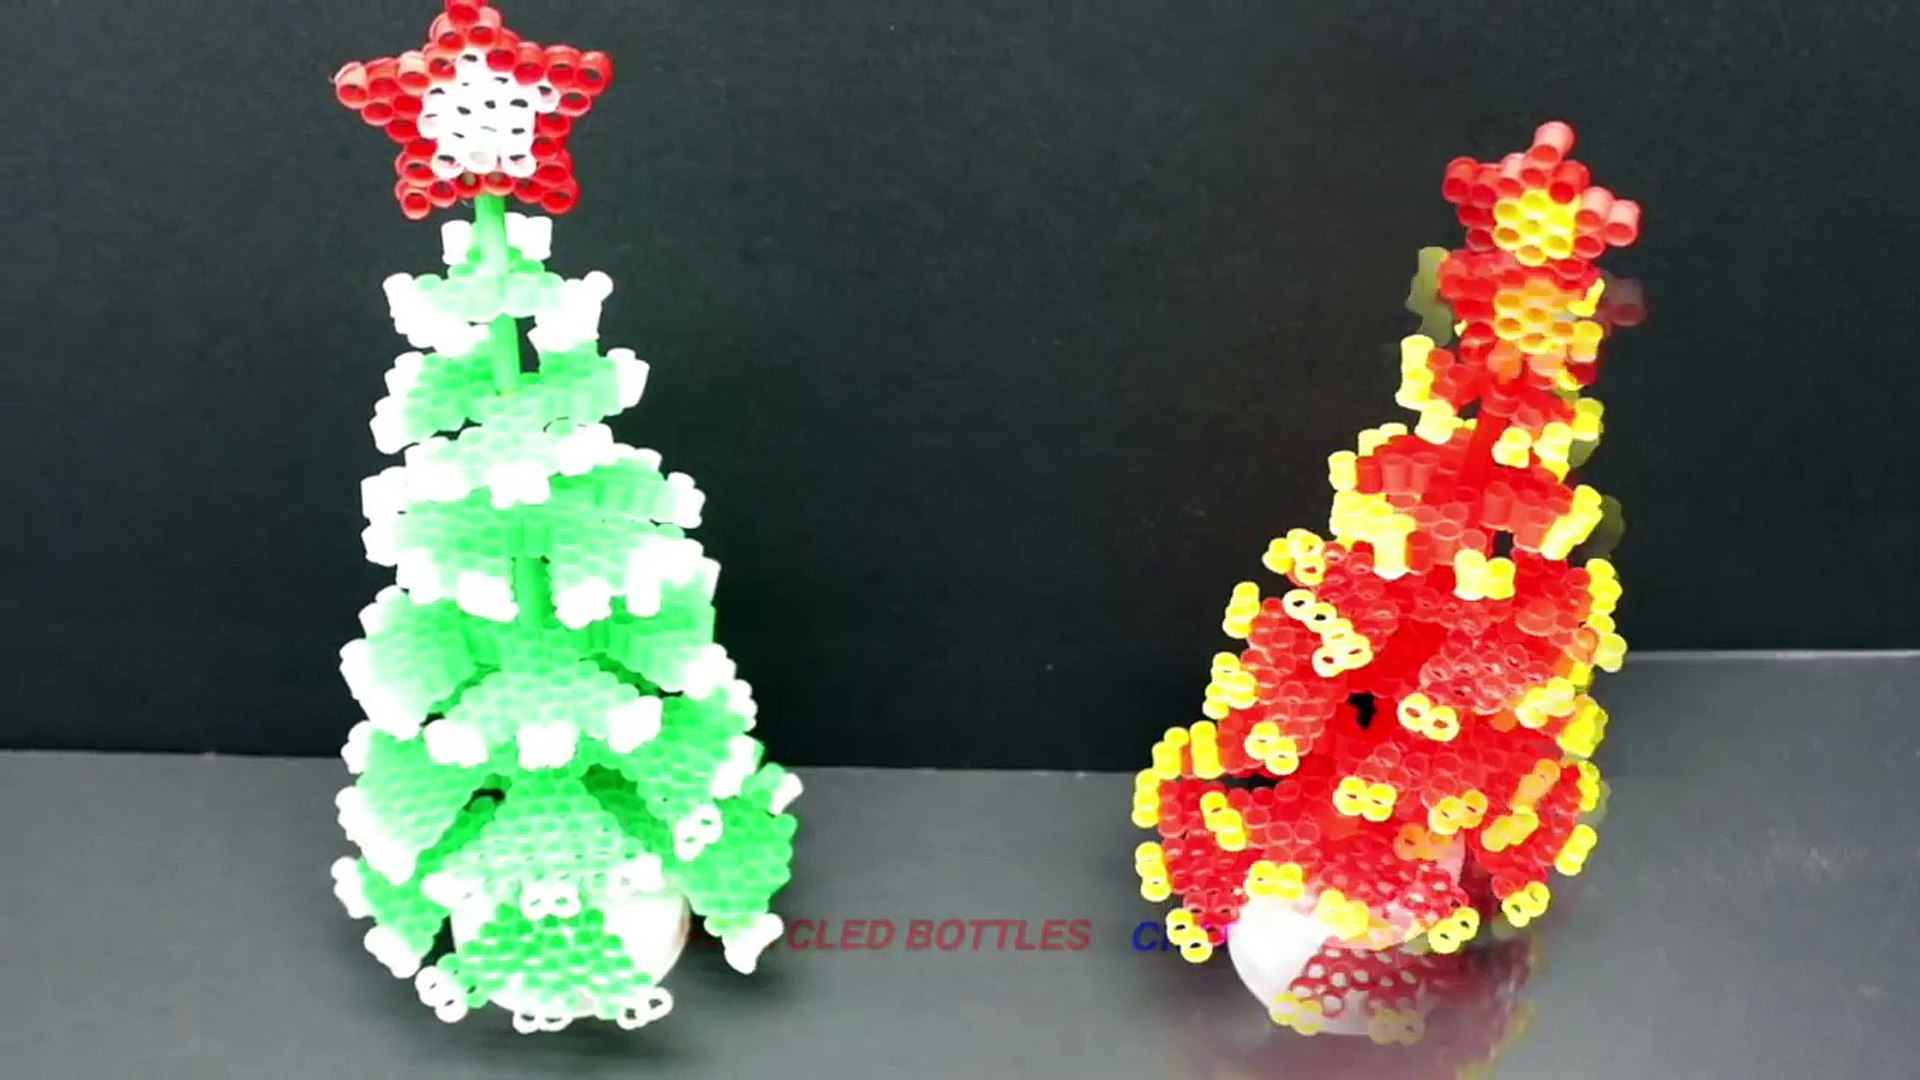 Christmas Tree Making With Drinking Straw